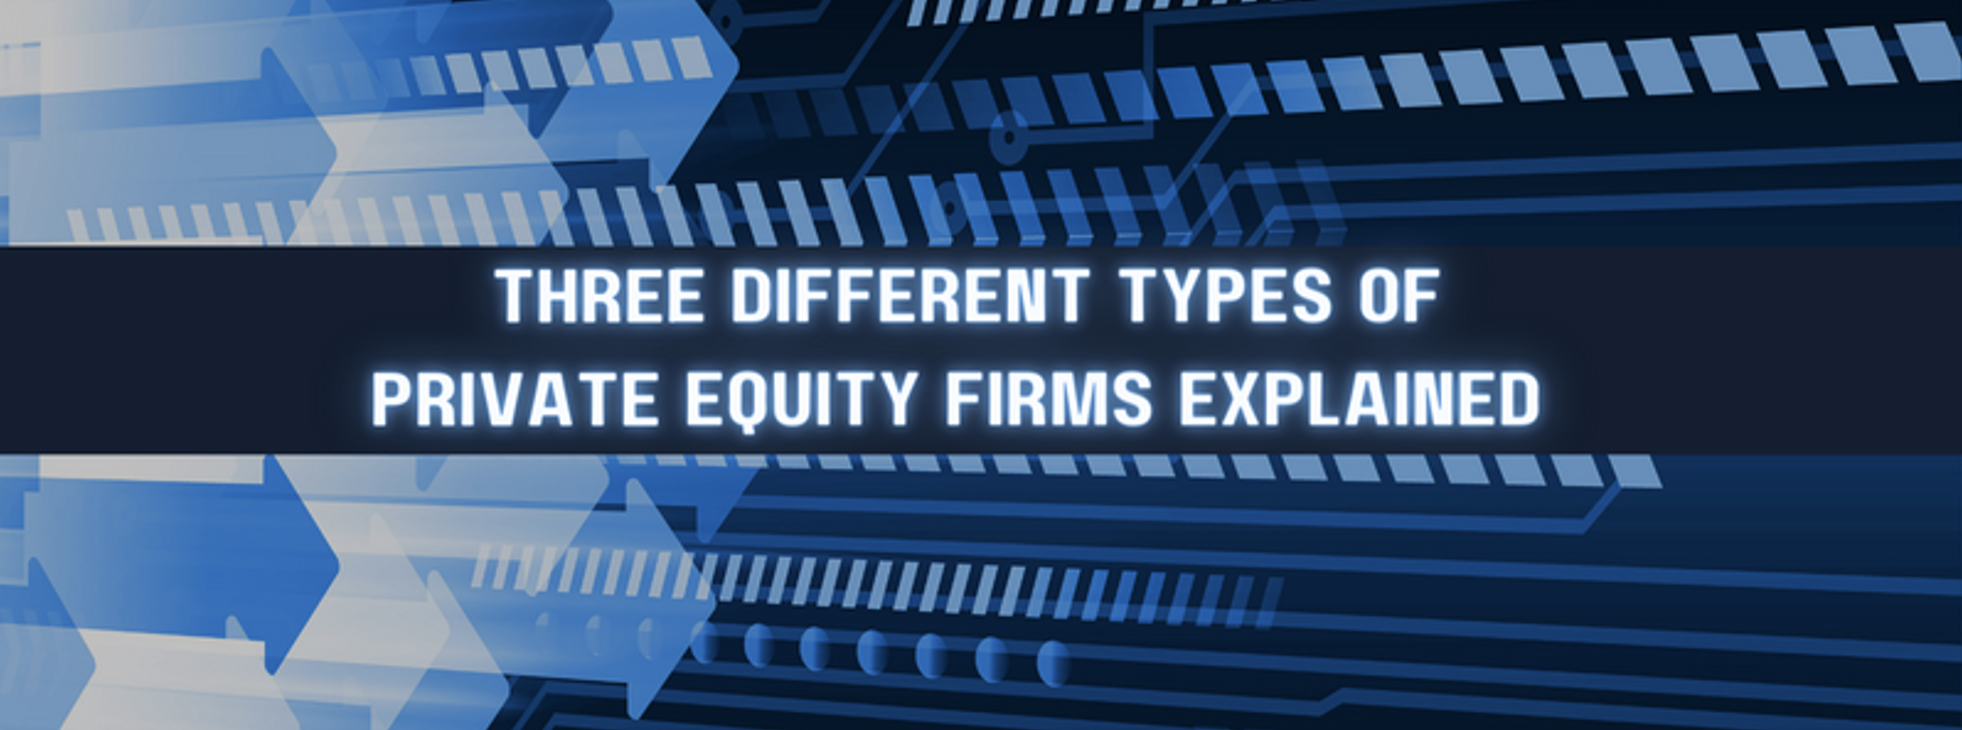 3 Different Types of Private Equity Firms Explained - Pivot Point Security